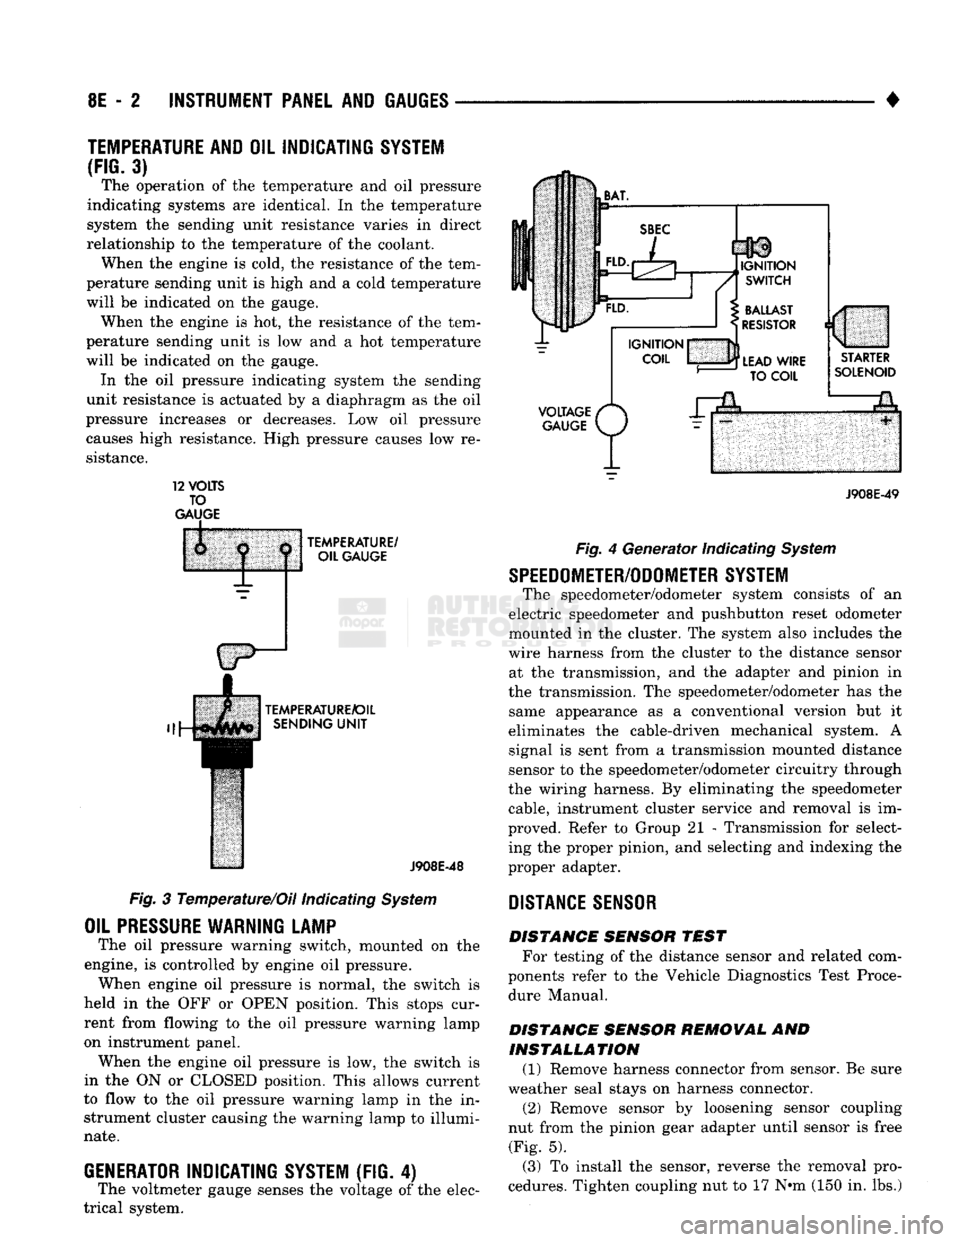 DODGE TRUCK 1993  Service Repair Manual 
8E
 - 2
 INSTRUMENT PANEL
 AND
 GAUGES 

• 
TEMPERATURE AND
 OIL
 INDICATING SYSTEM 
(FIG.
 3)  The operation of the temperature and oil pressure 
indicating systems are identical. In the temperatu